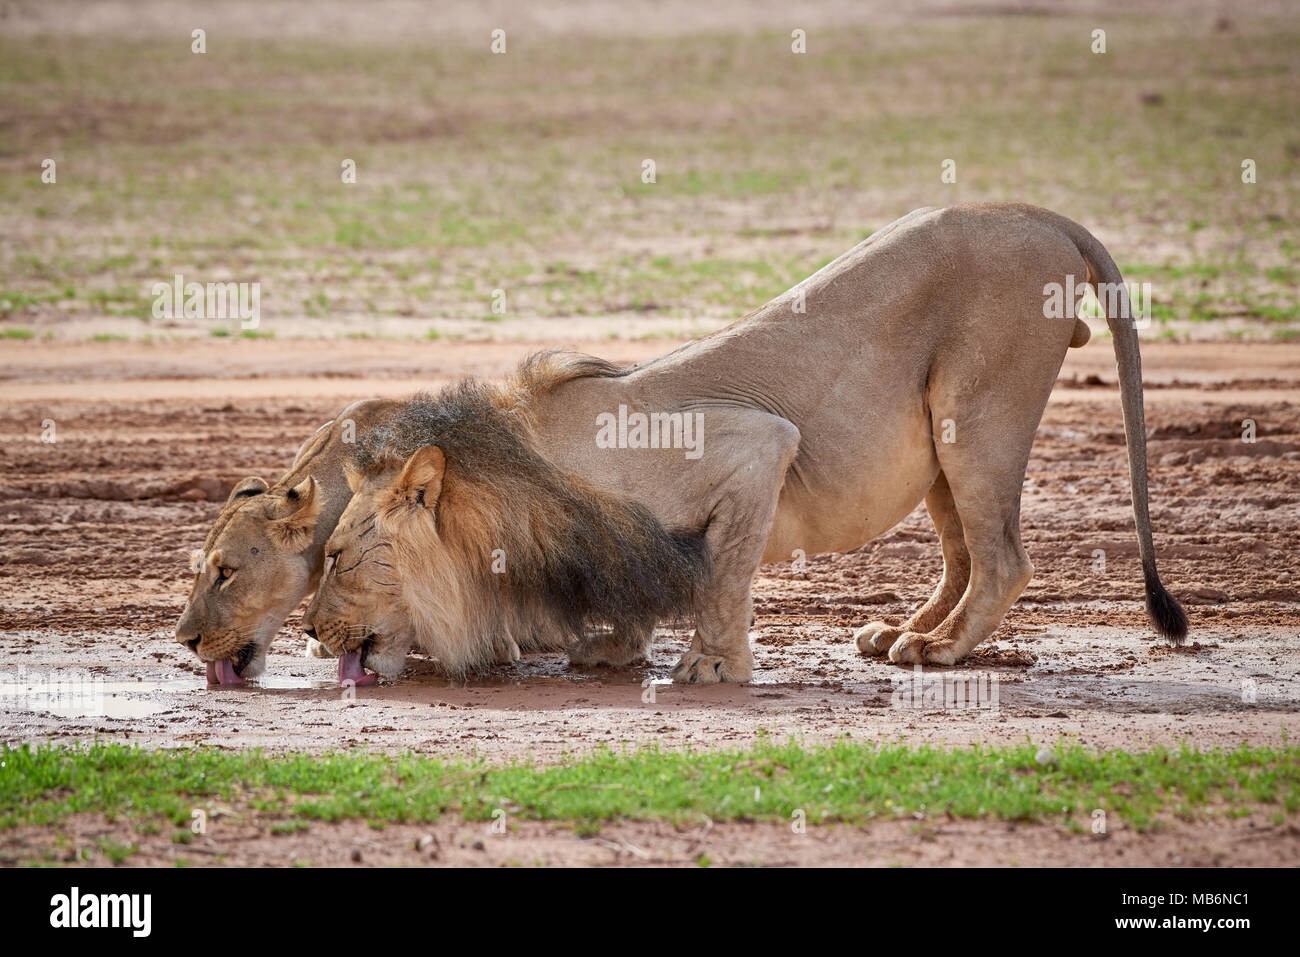 lion couple, Panthera leo, drinking at a puddle in the Kalahari, Kgalagadi Transfrontier Park, South Africa, Africa Stock Photo